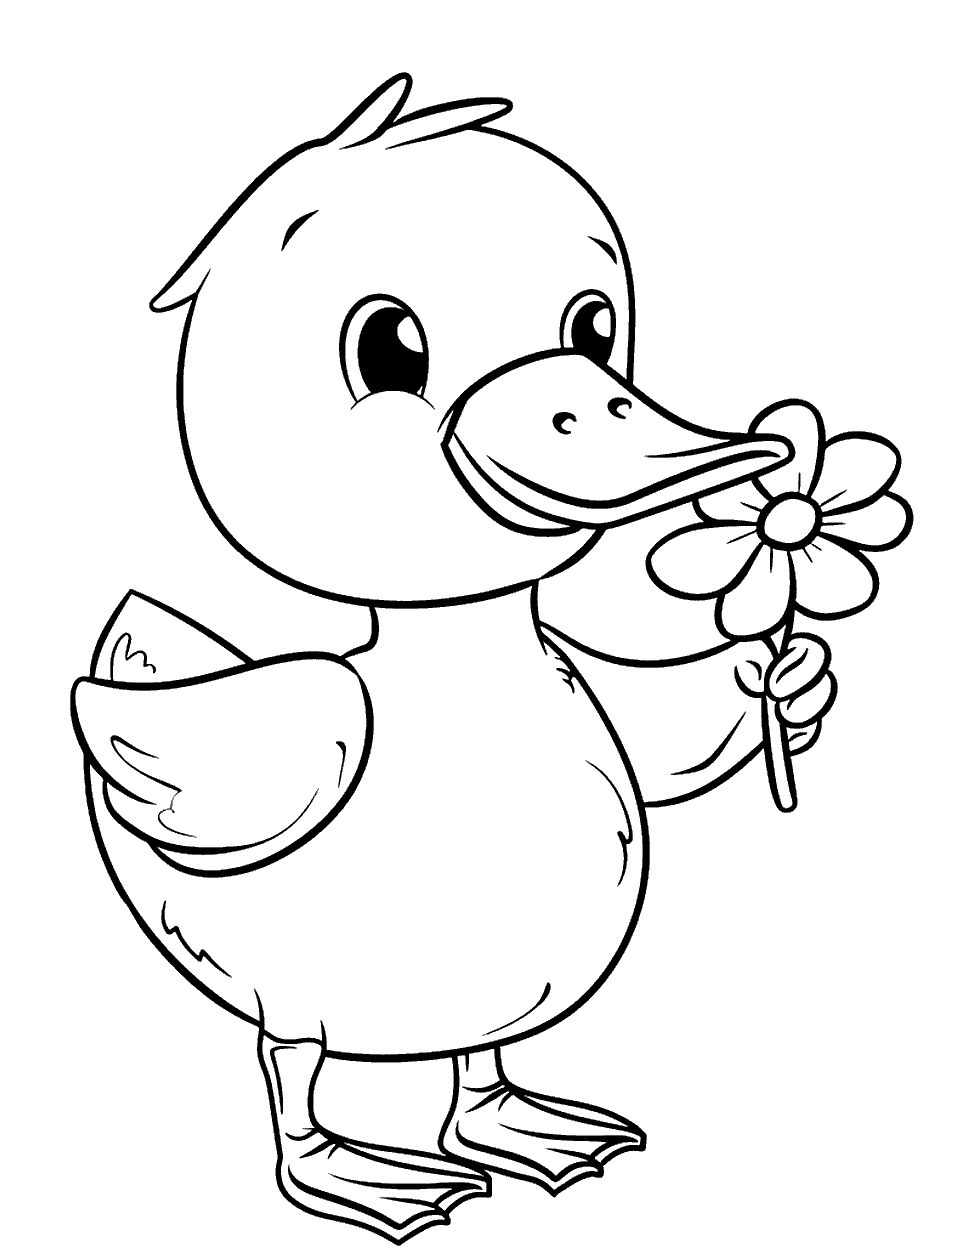 Kawaii Duck Holding a Flower Coloring Page - An adorable, kawaii-style duck holding a small flower.